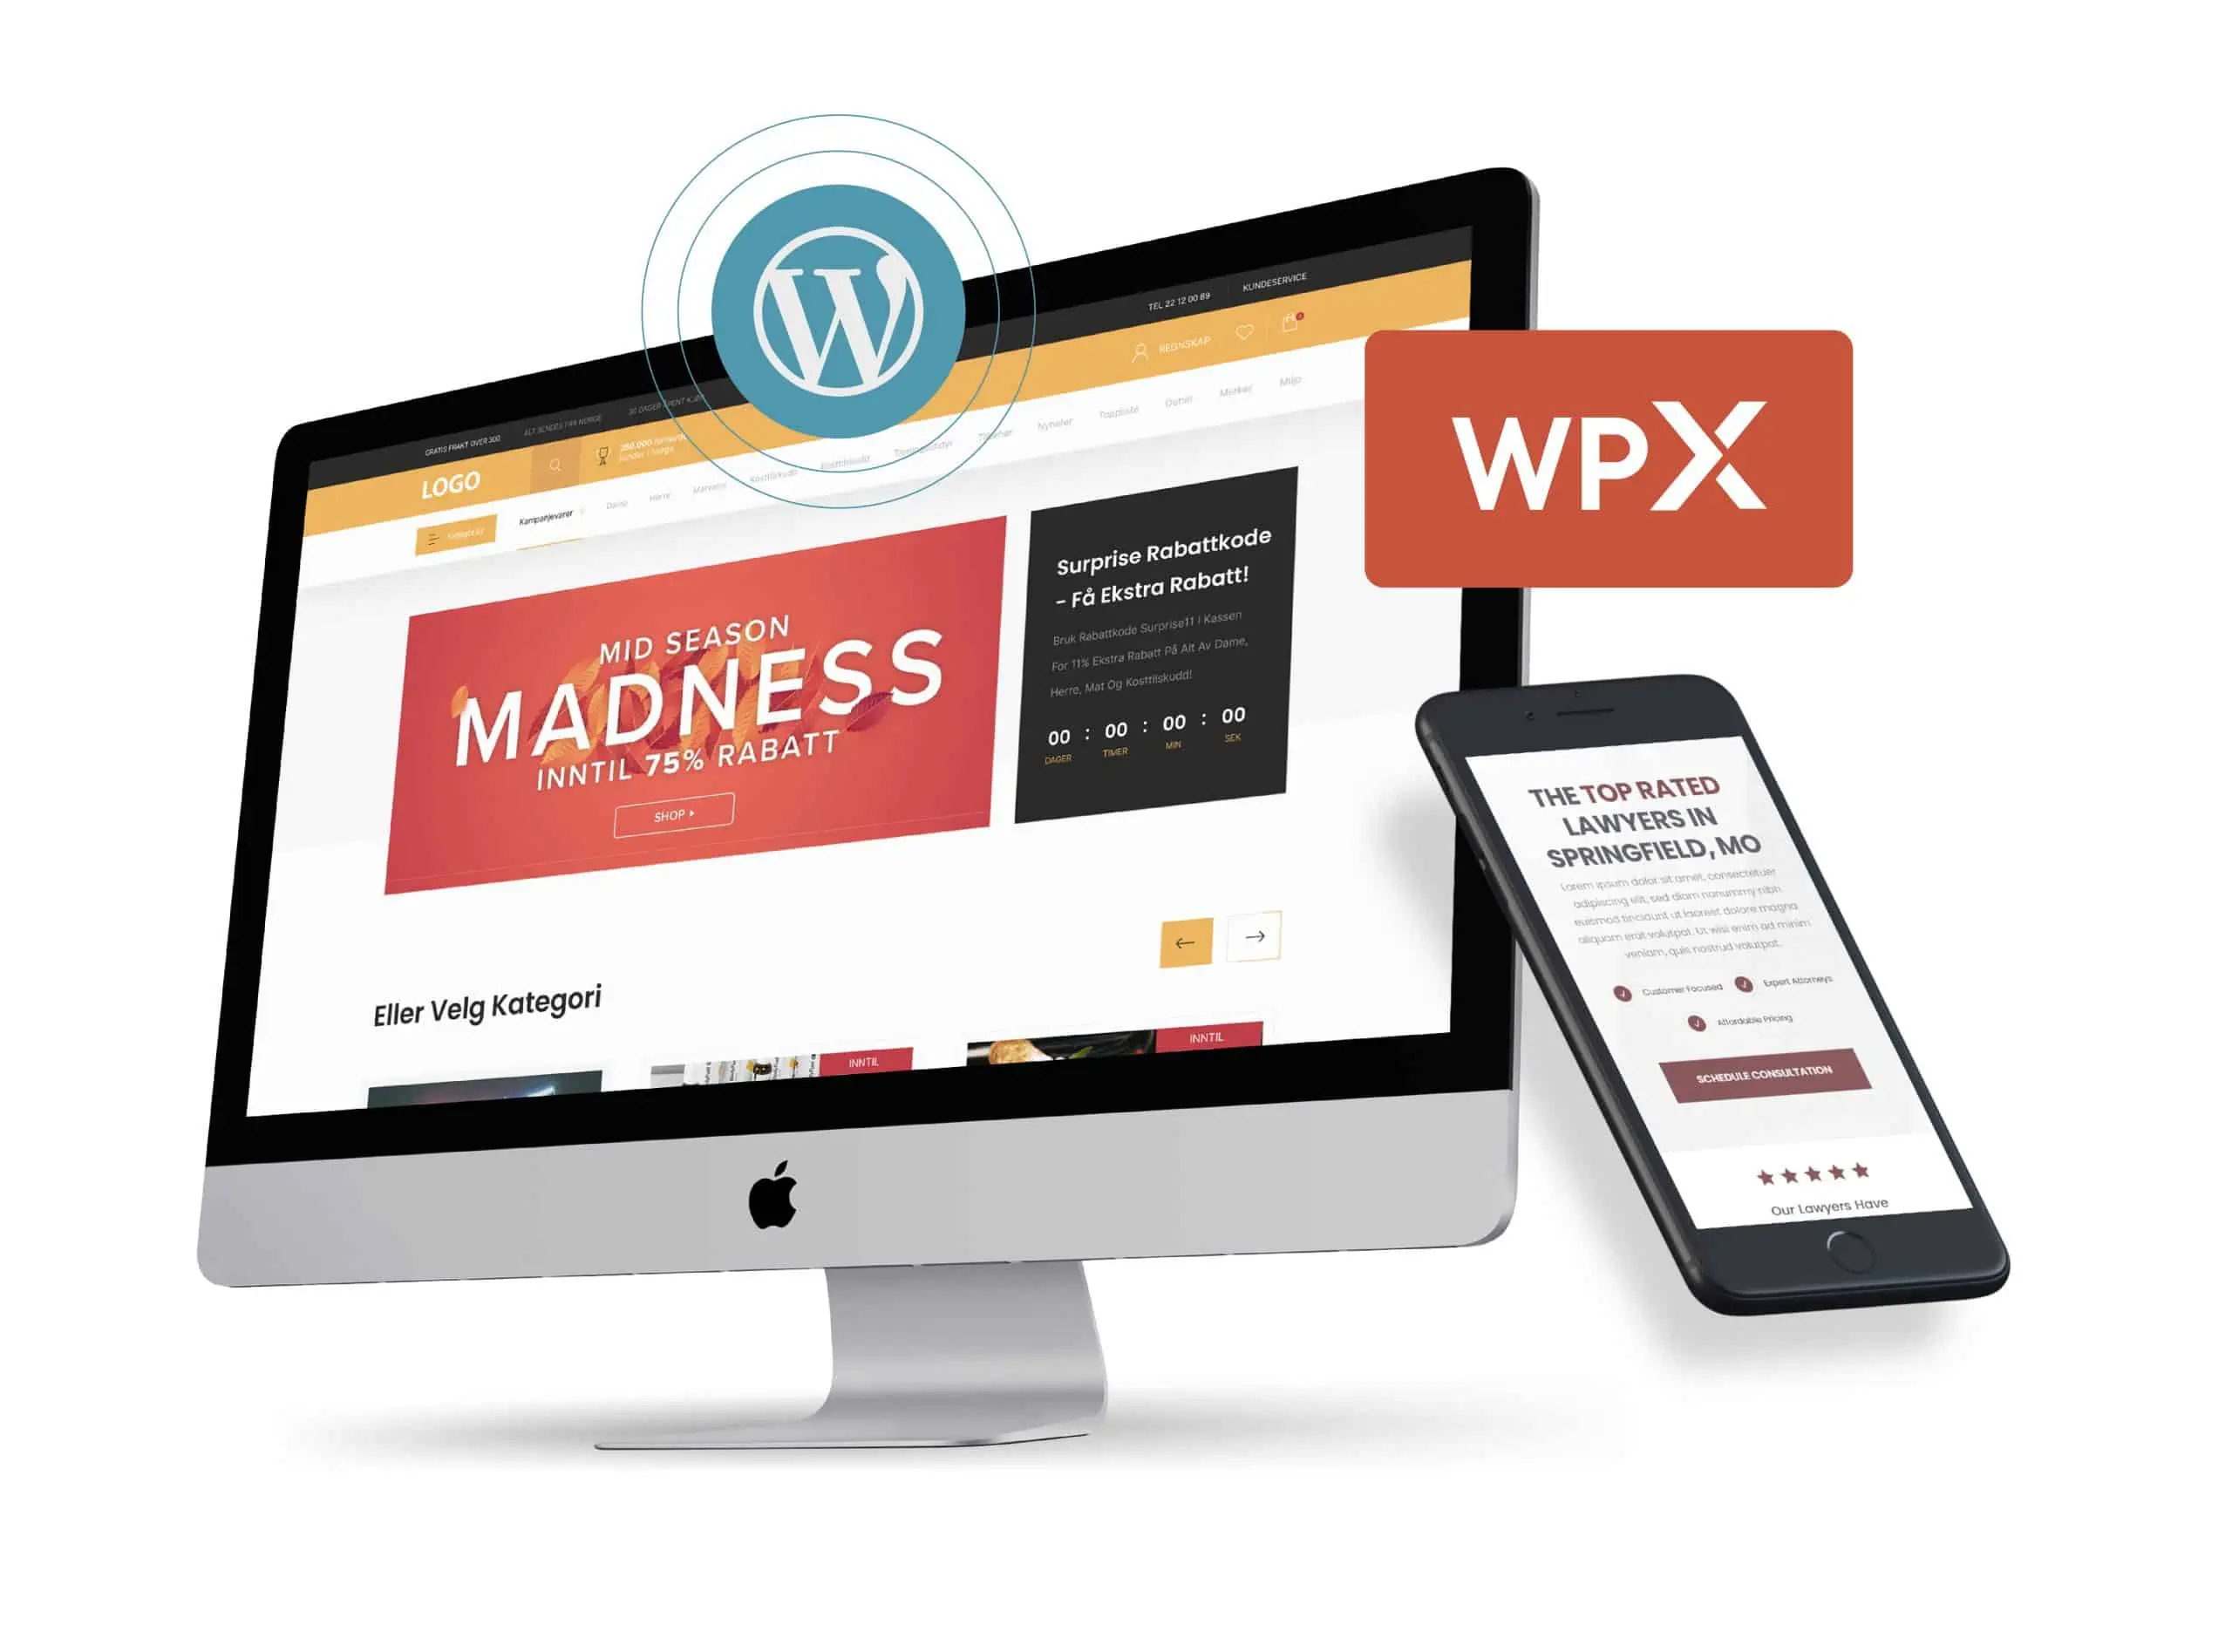 Converting From Shopify To Wordpress | WPXStudios